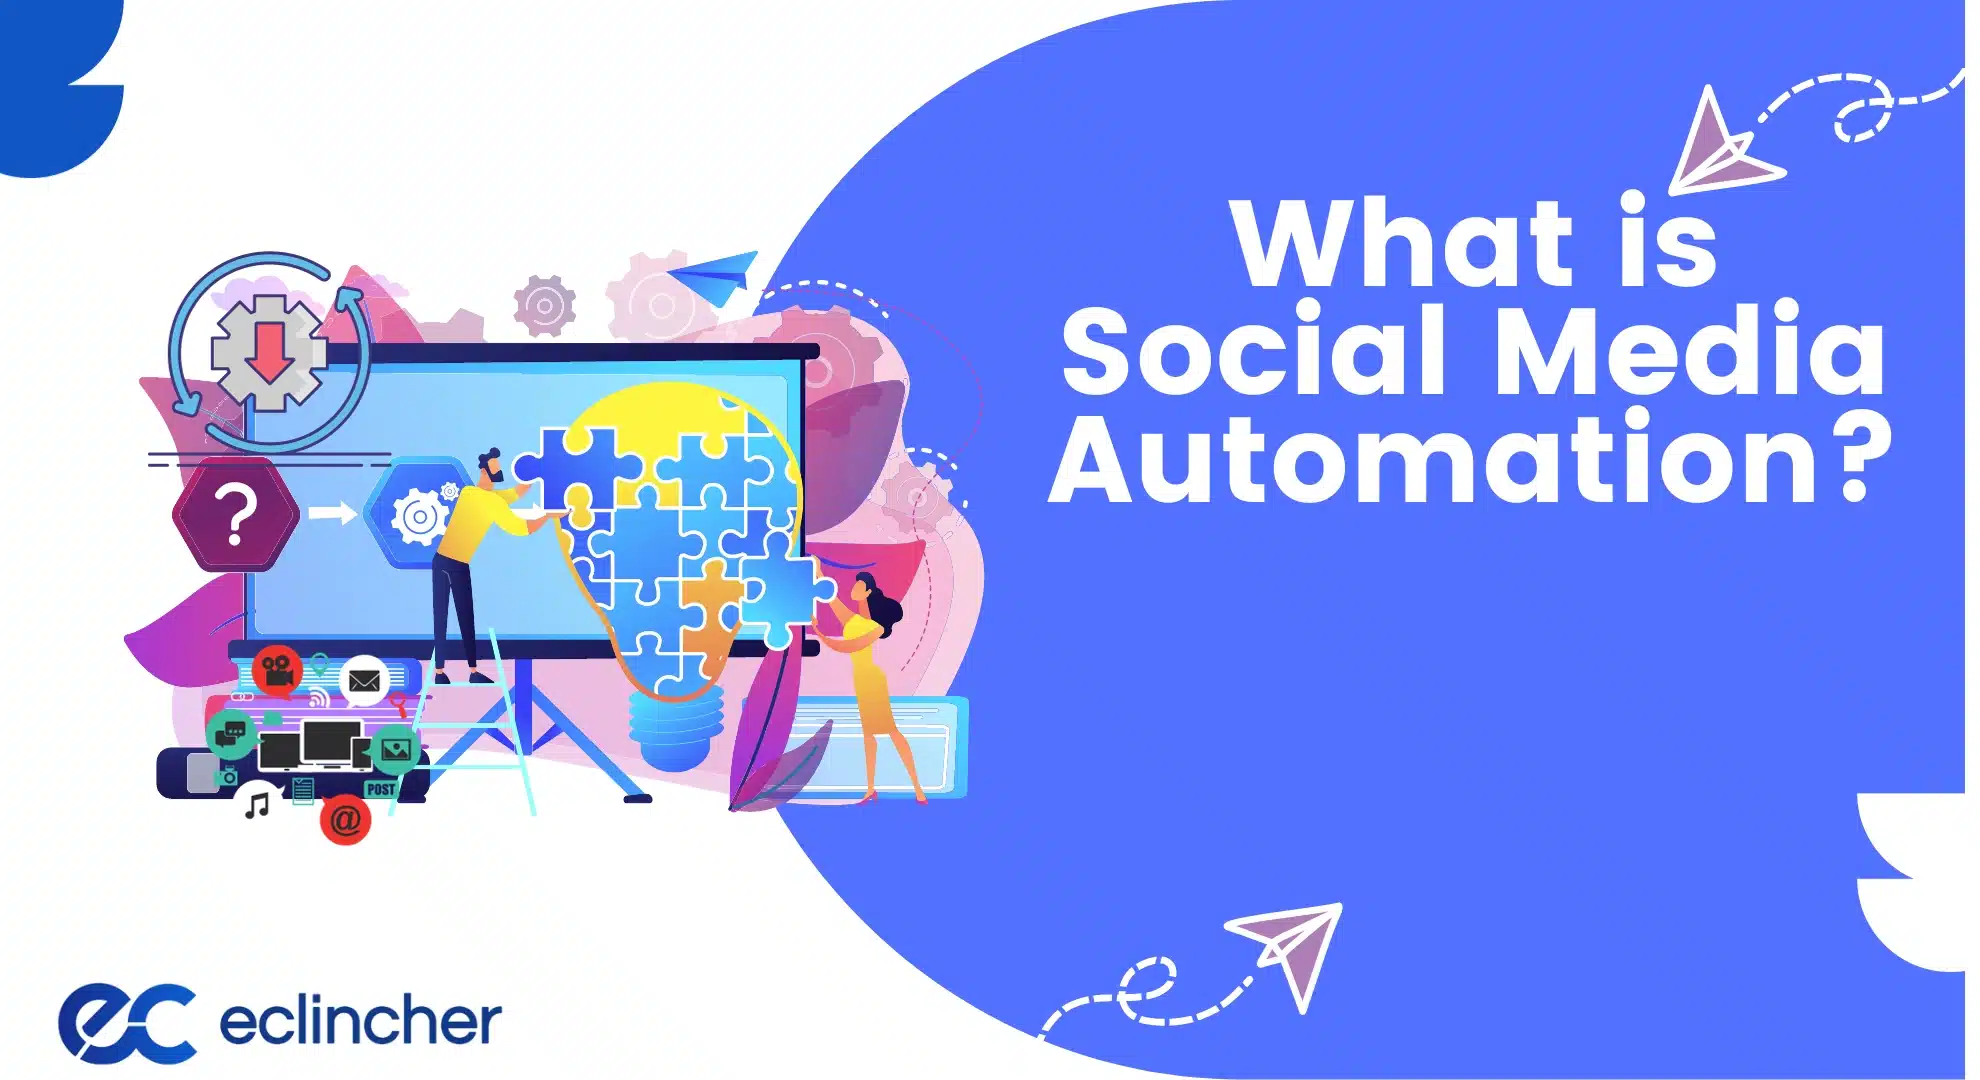 What is Social Media Automation